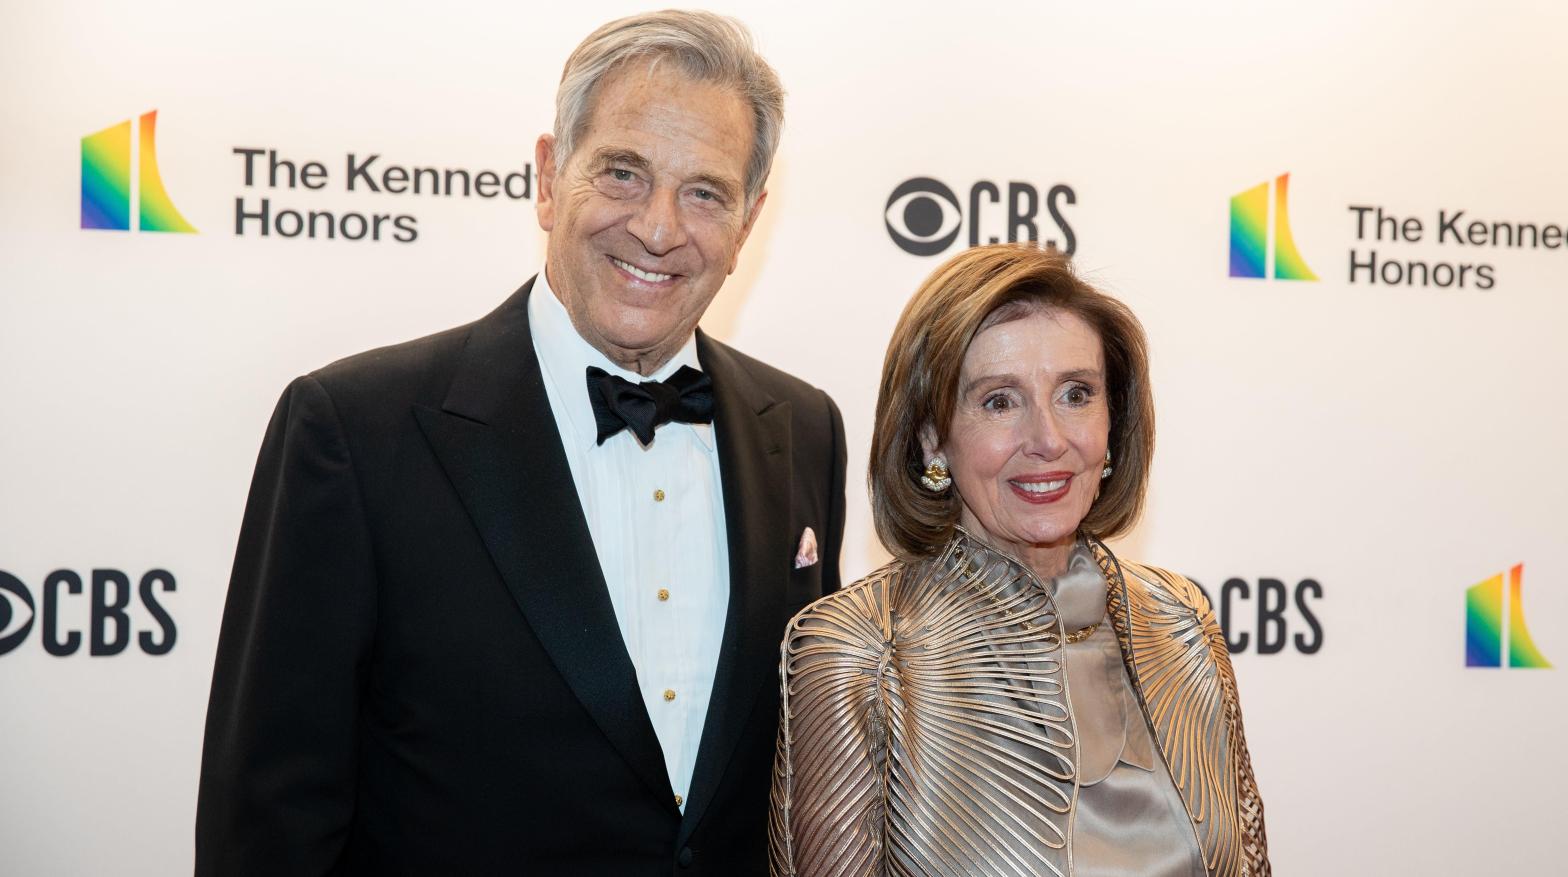 Paul Pelosi and Nancy Pelosi at the Kennedy Centre in Washington, D.C. on December 5, 2021 (Photo: Amanda Andrade-Rhoades/For The Washington Post, Getty Images)